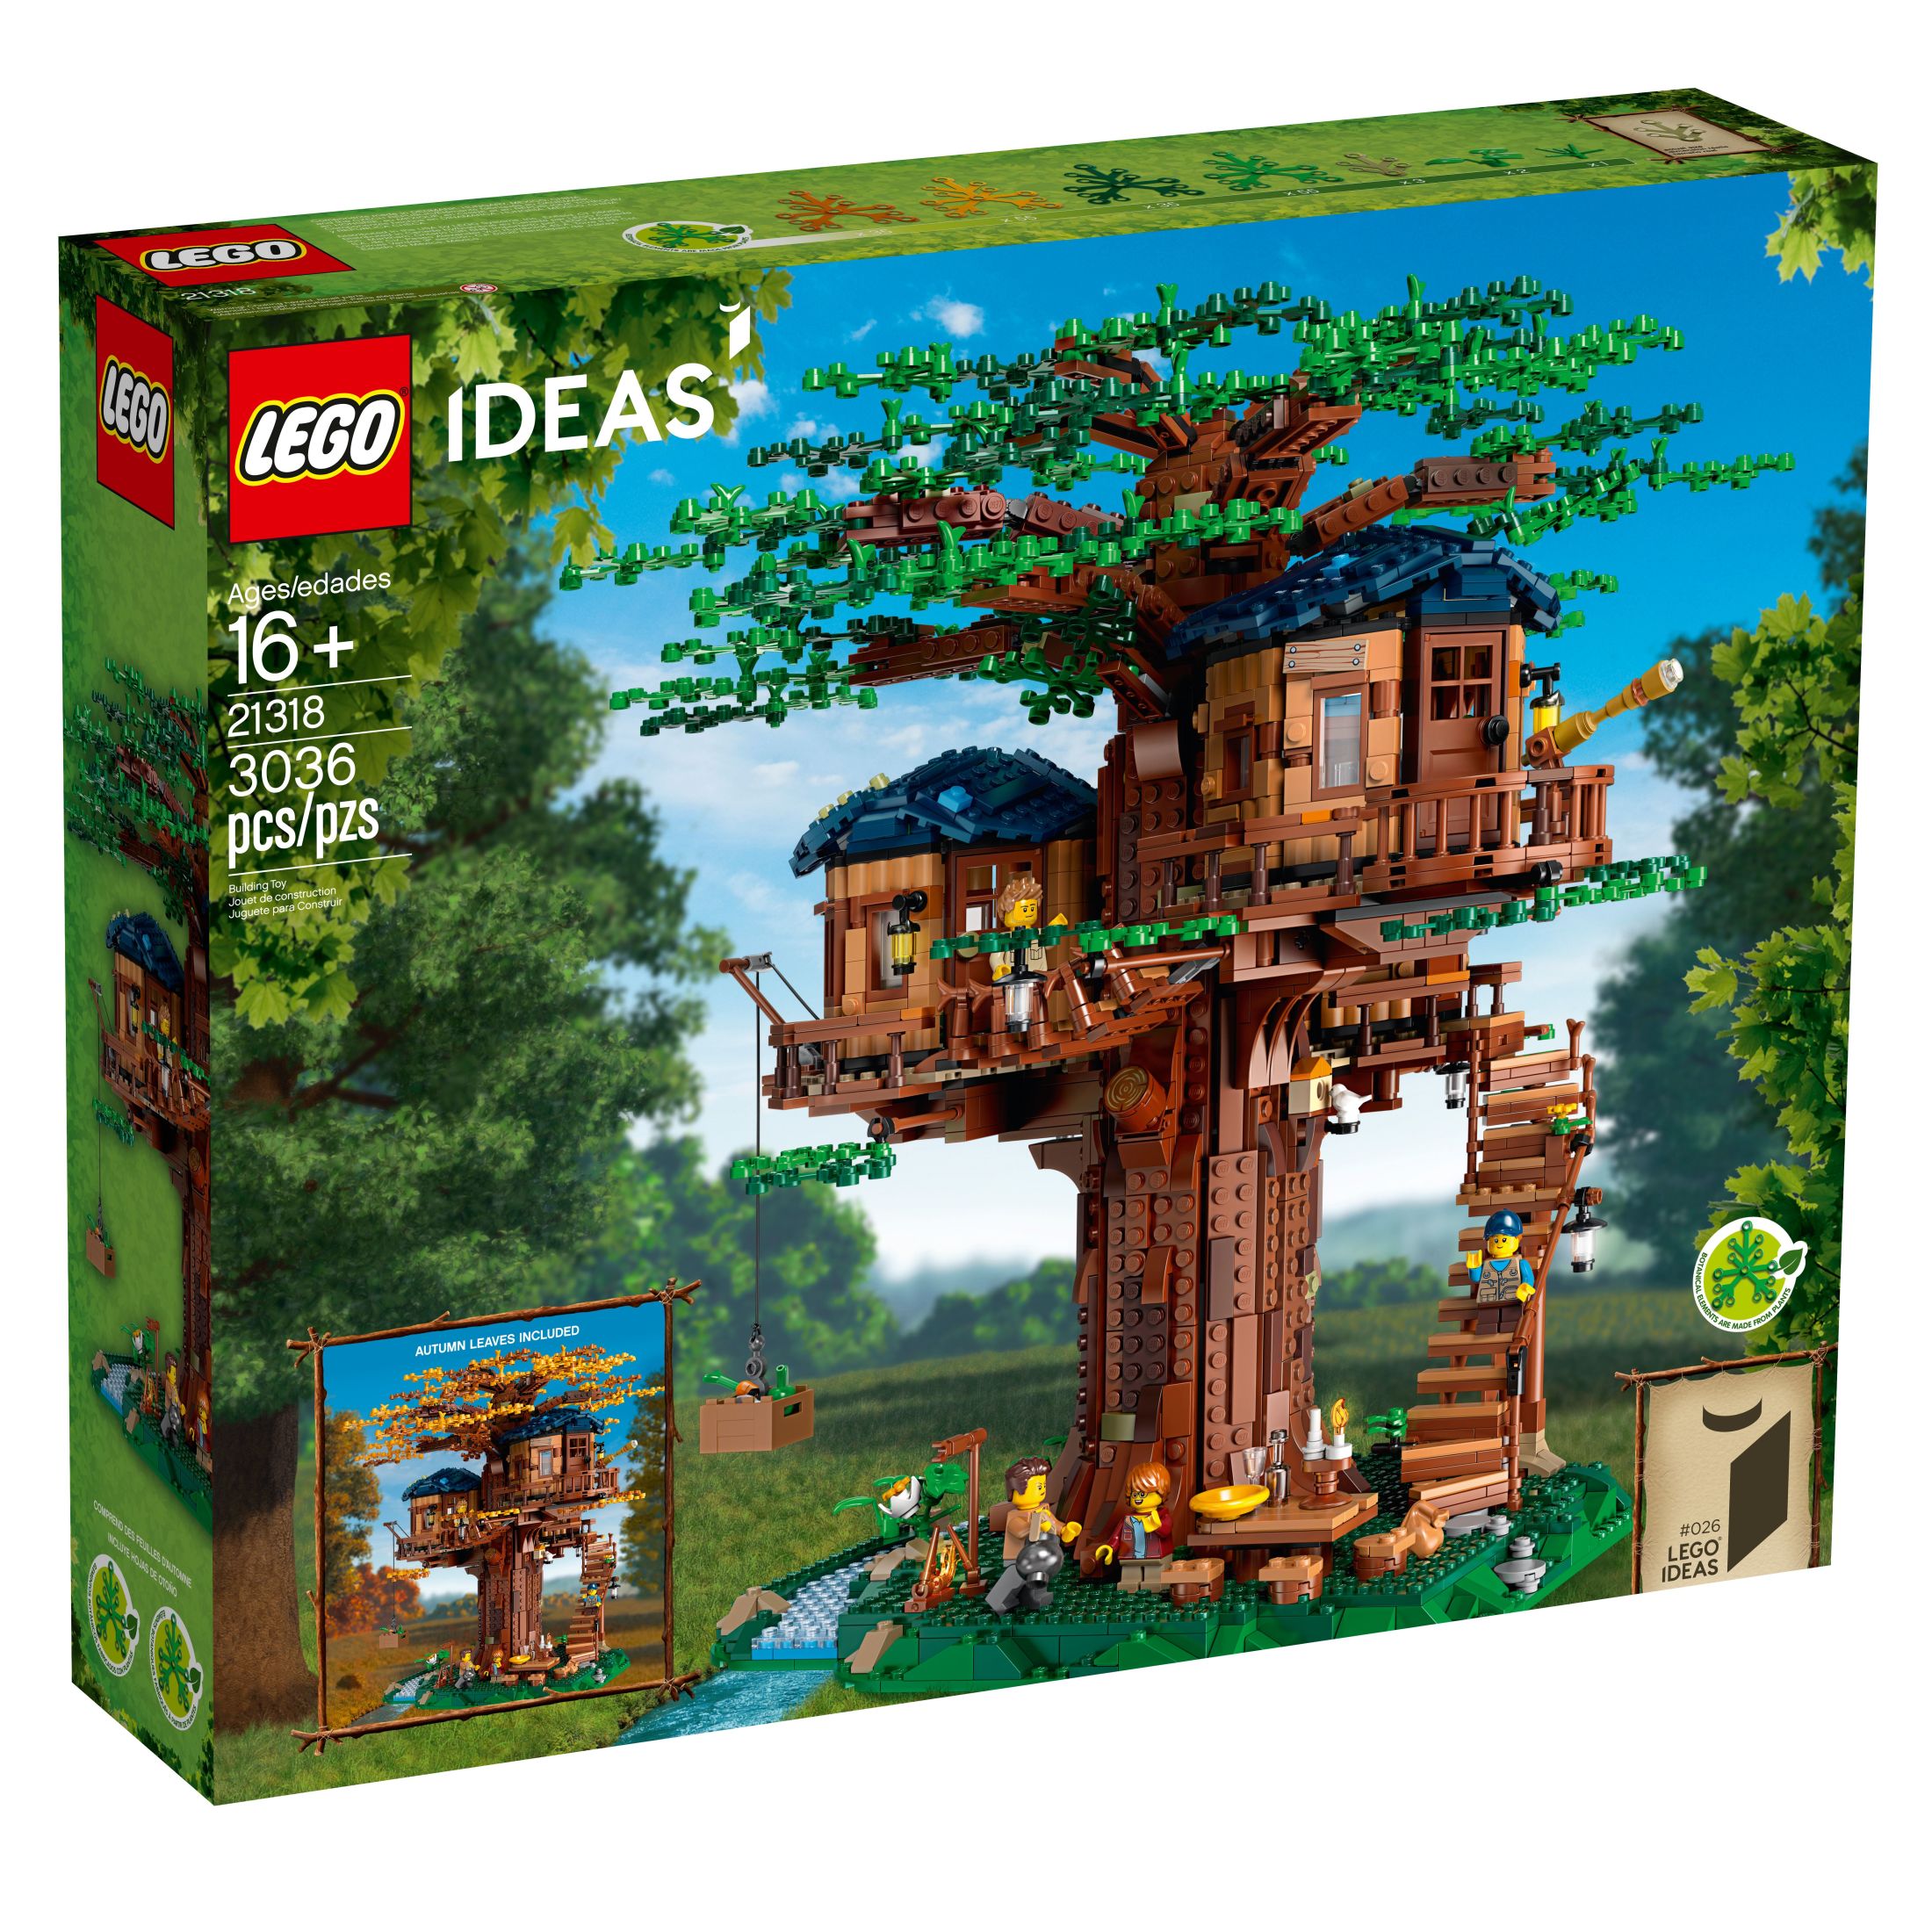 LEGO Ideas Tree House 21318, Model Construction Set for 16 Plus Year Olds with 3 Cabins, Interchangeable Leaves, Minifigures and a Bird Figure - image 4 of 9